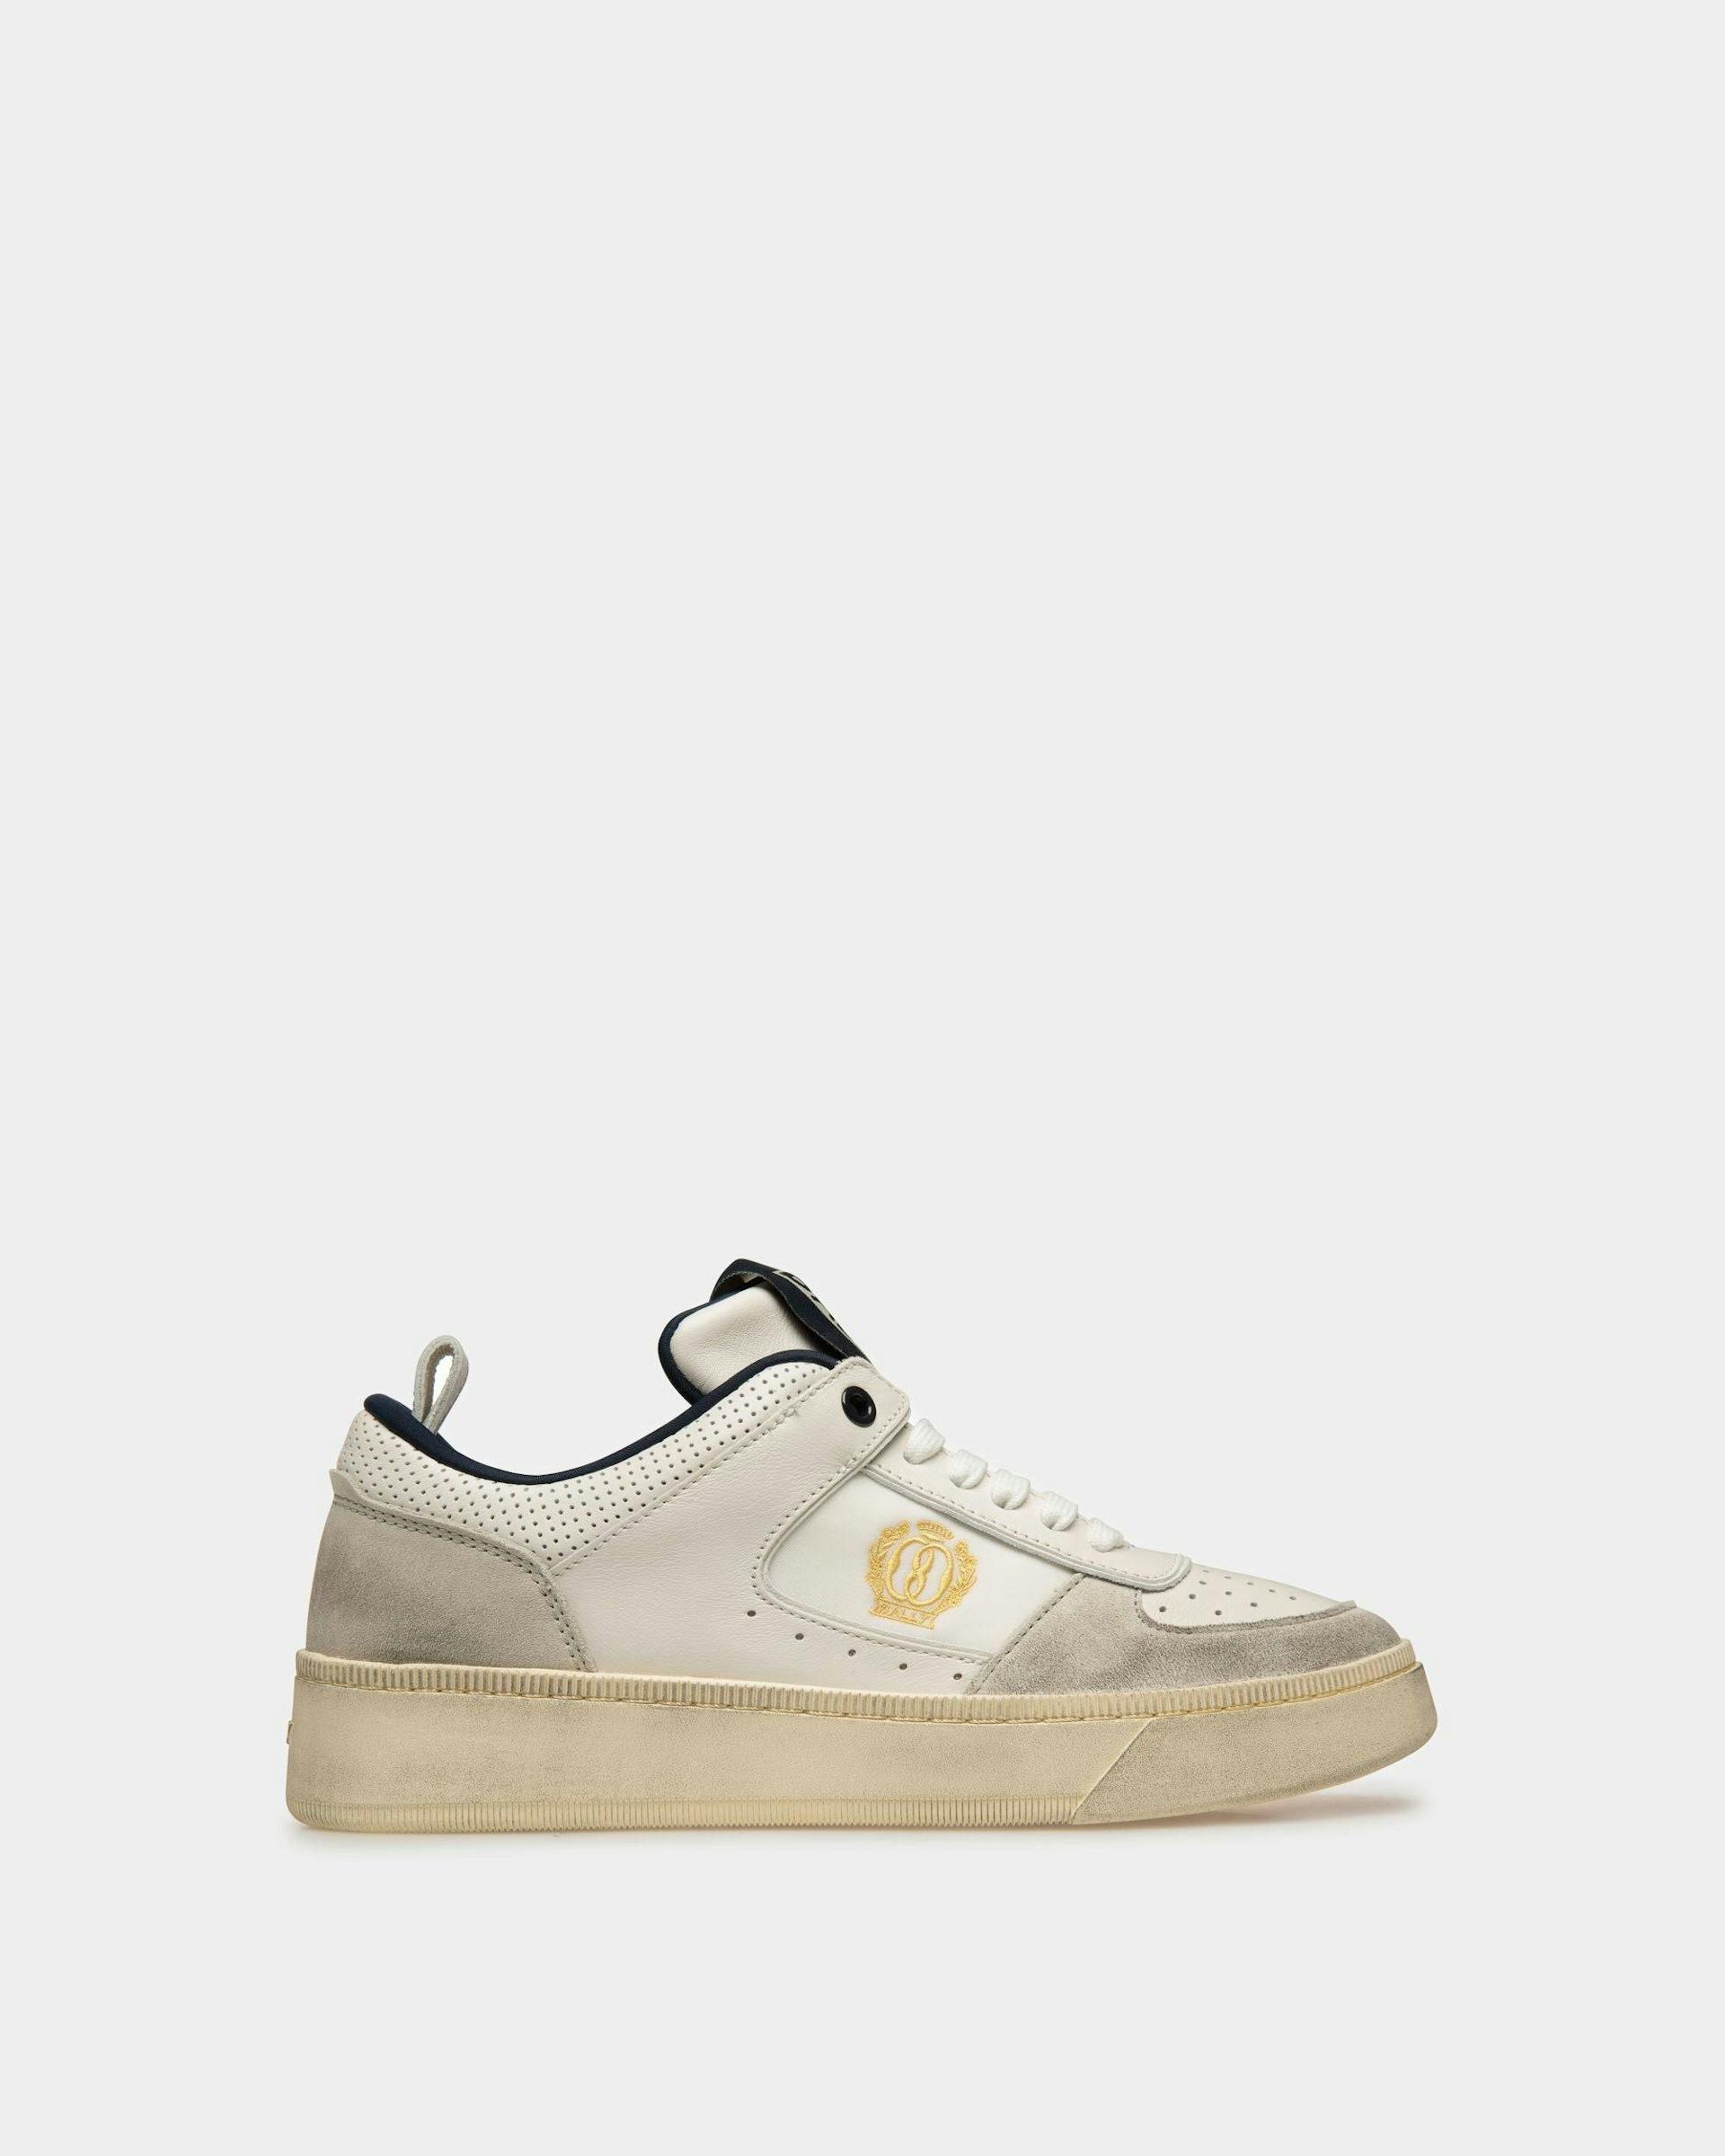 Women's Raise Sneakers In Dusty White And Midnight Leather | Bally | Still Life Side